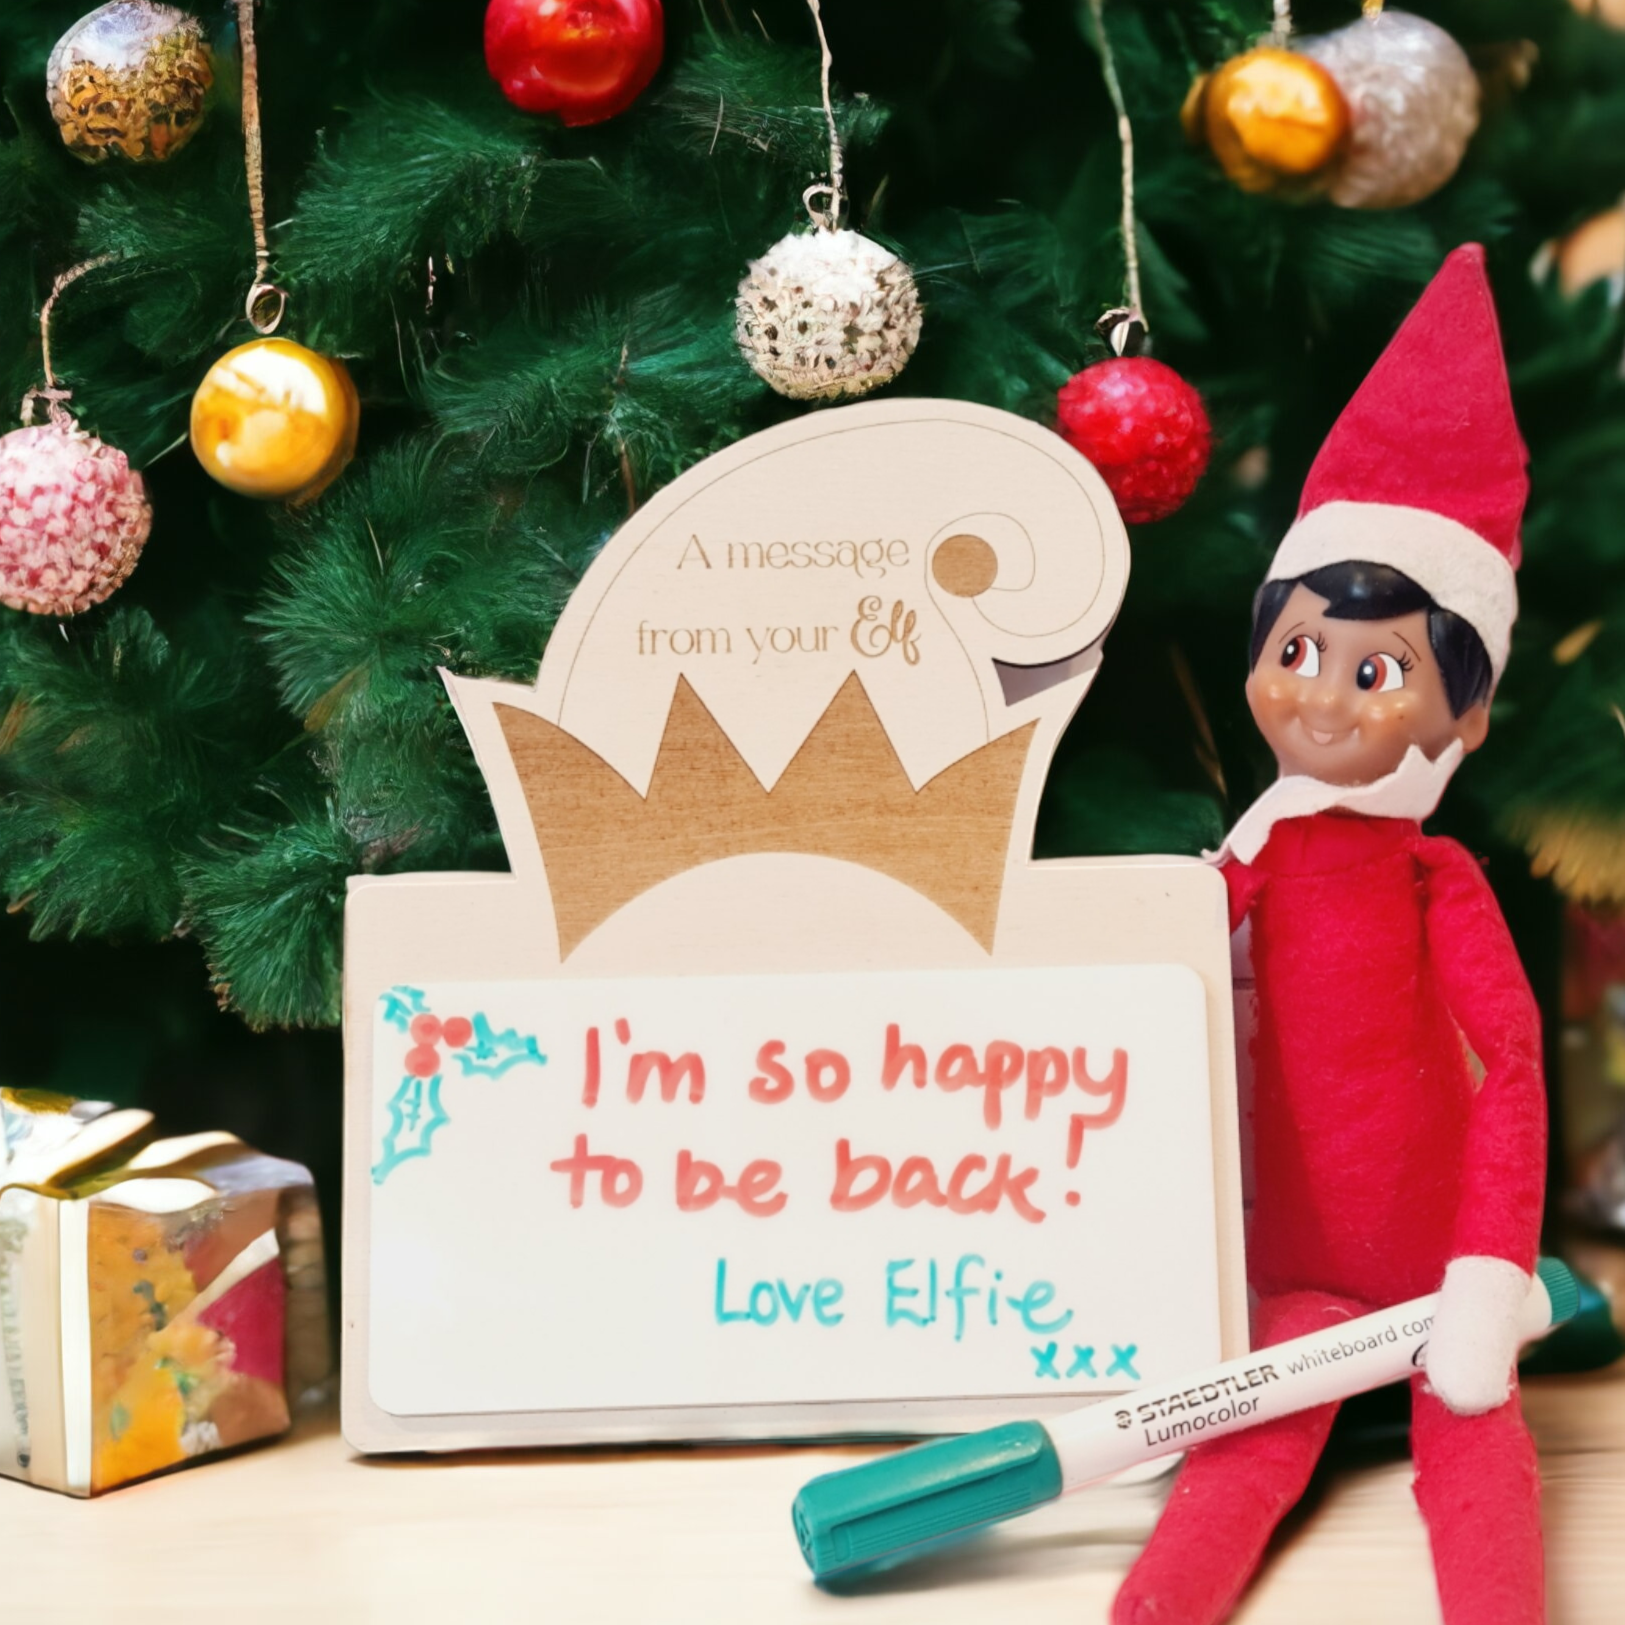 Elf on a shelf noticeboard - with whiteboard pad